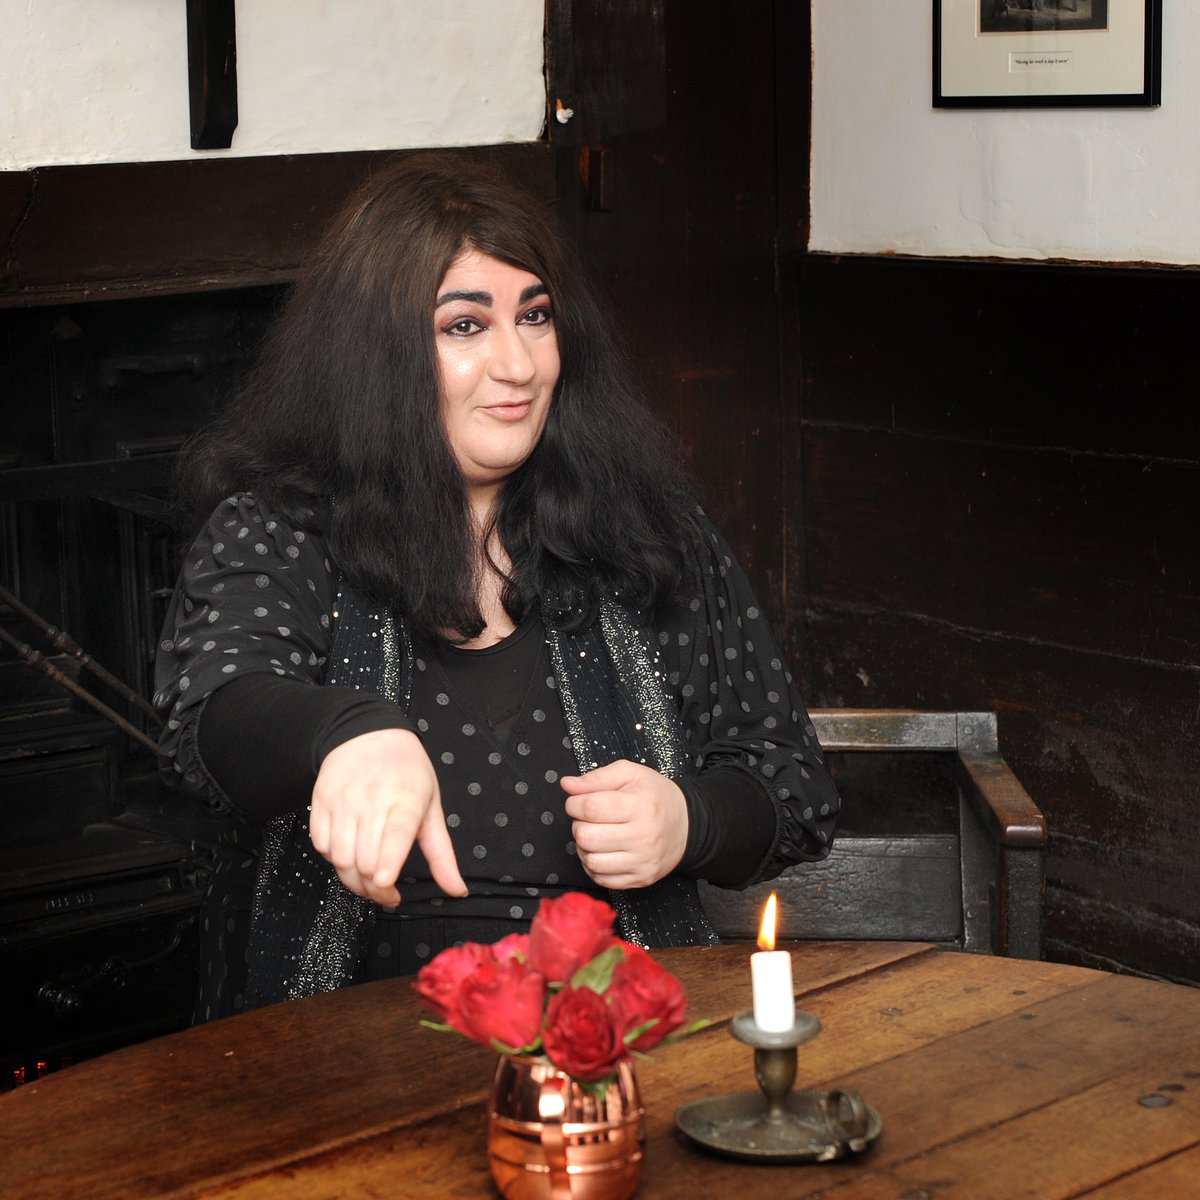 Embark on a Haunting Adventure at the Globe Inn, Dumfries On Tuesday, May 28th, join Kathleen Cronie, the award-winning storyteller for a captivating journey through the atmospheric rooms at The Globe Inn. You'll hear intriguing stories about Rabbie Burns, the chilling tale of